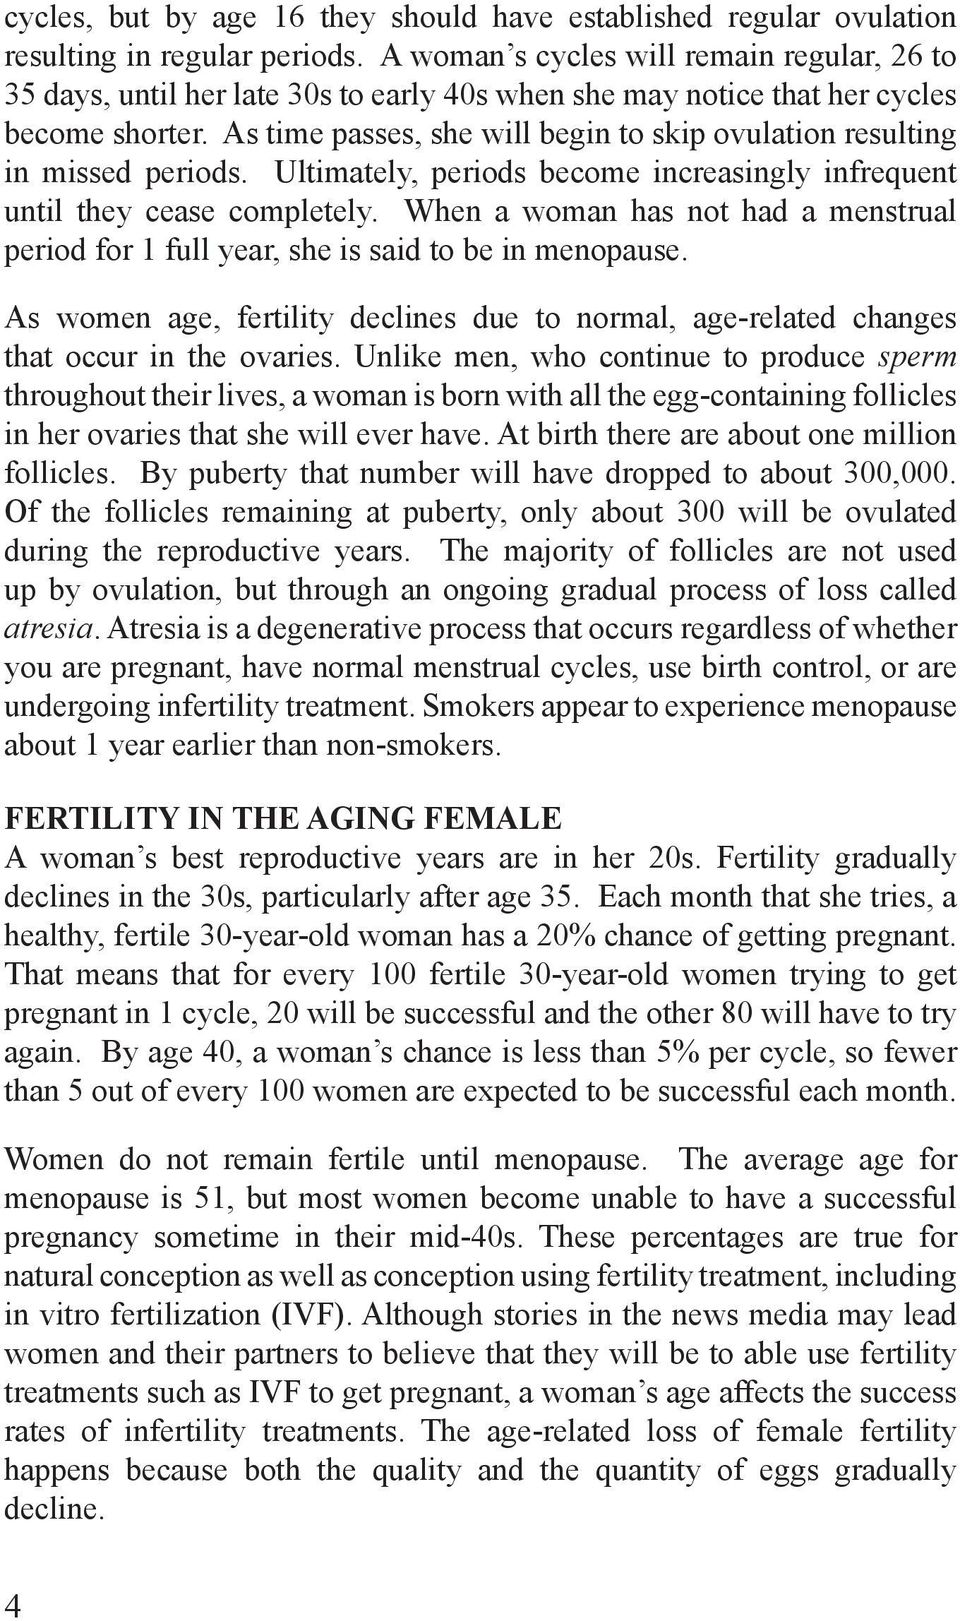 As time passes, she will begin to skip ovulation resulting in missed periods. Ultimately, periods become increasingly infrequent until they cease completely.